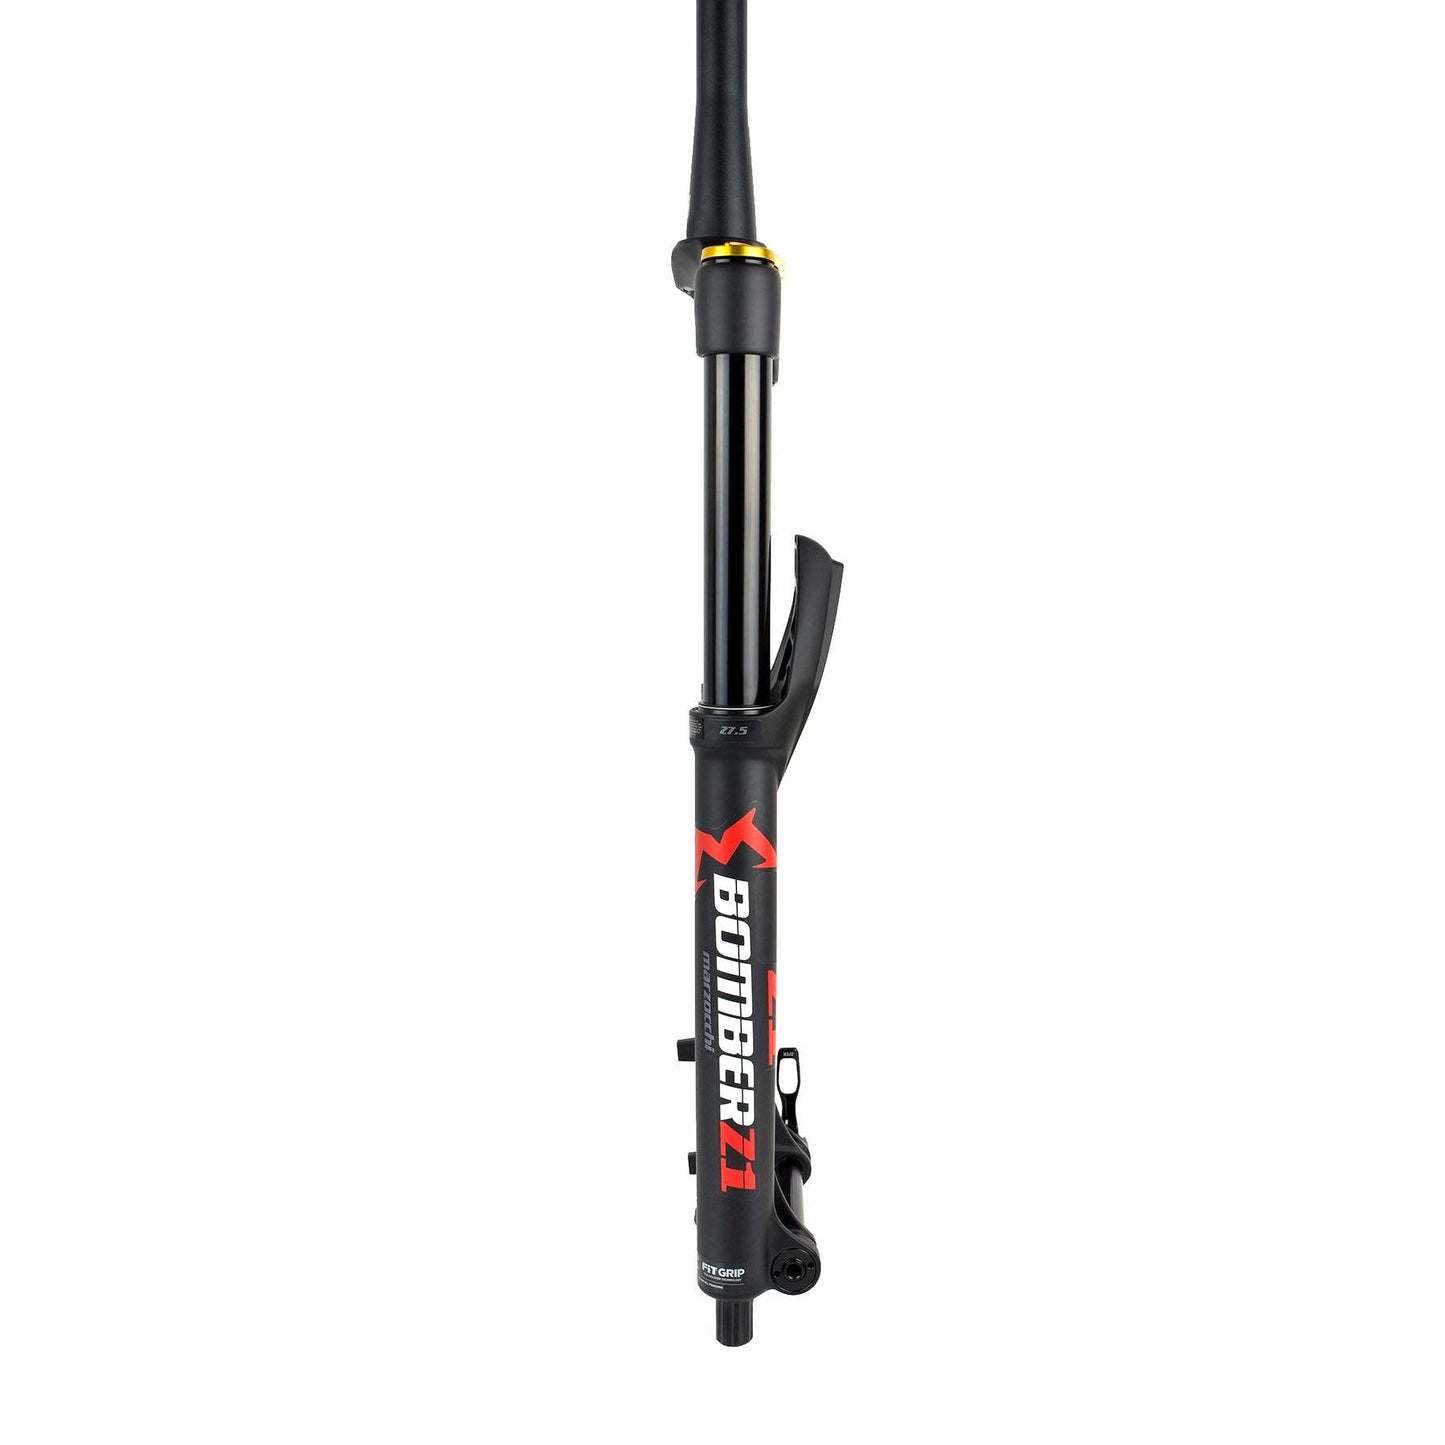 Marzocchi Bomber Z1 GRIP Sweep-Adj Tapered Fork 27.5" / 170mm / 44mm - Black